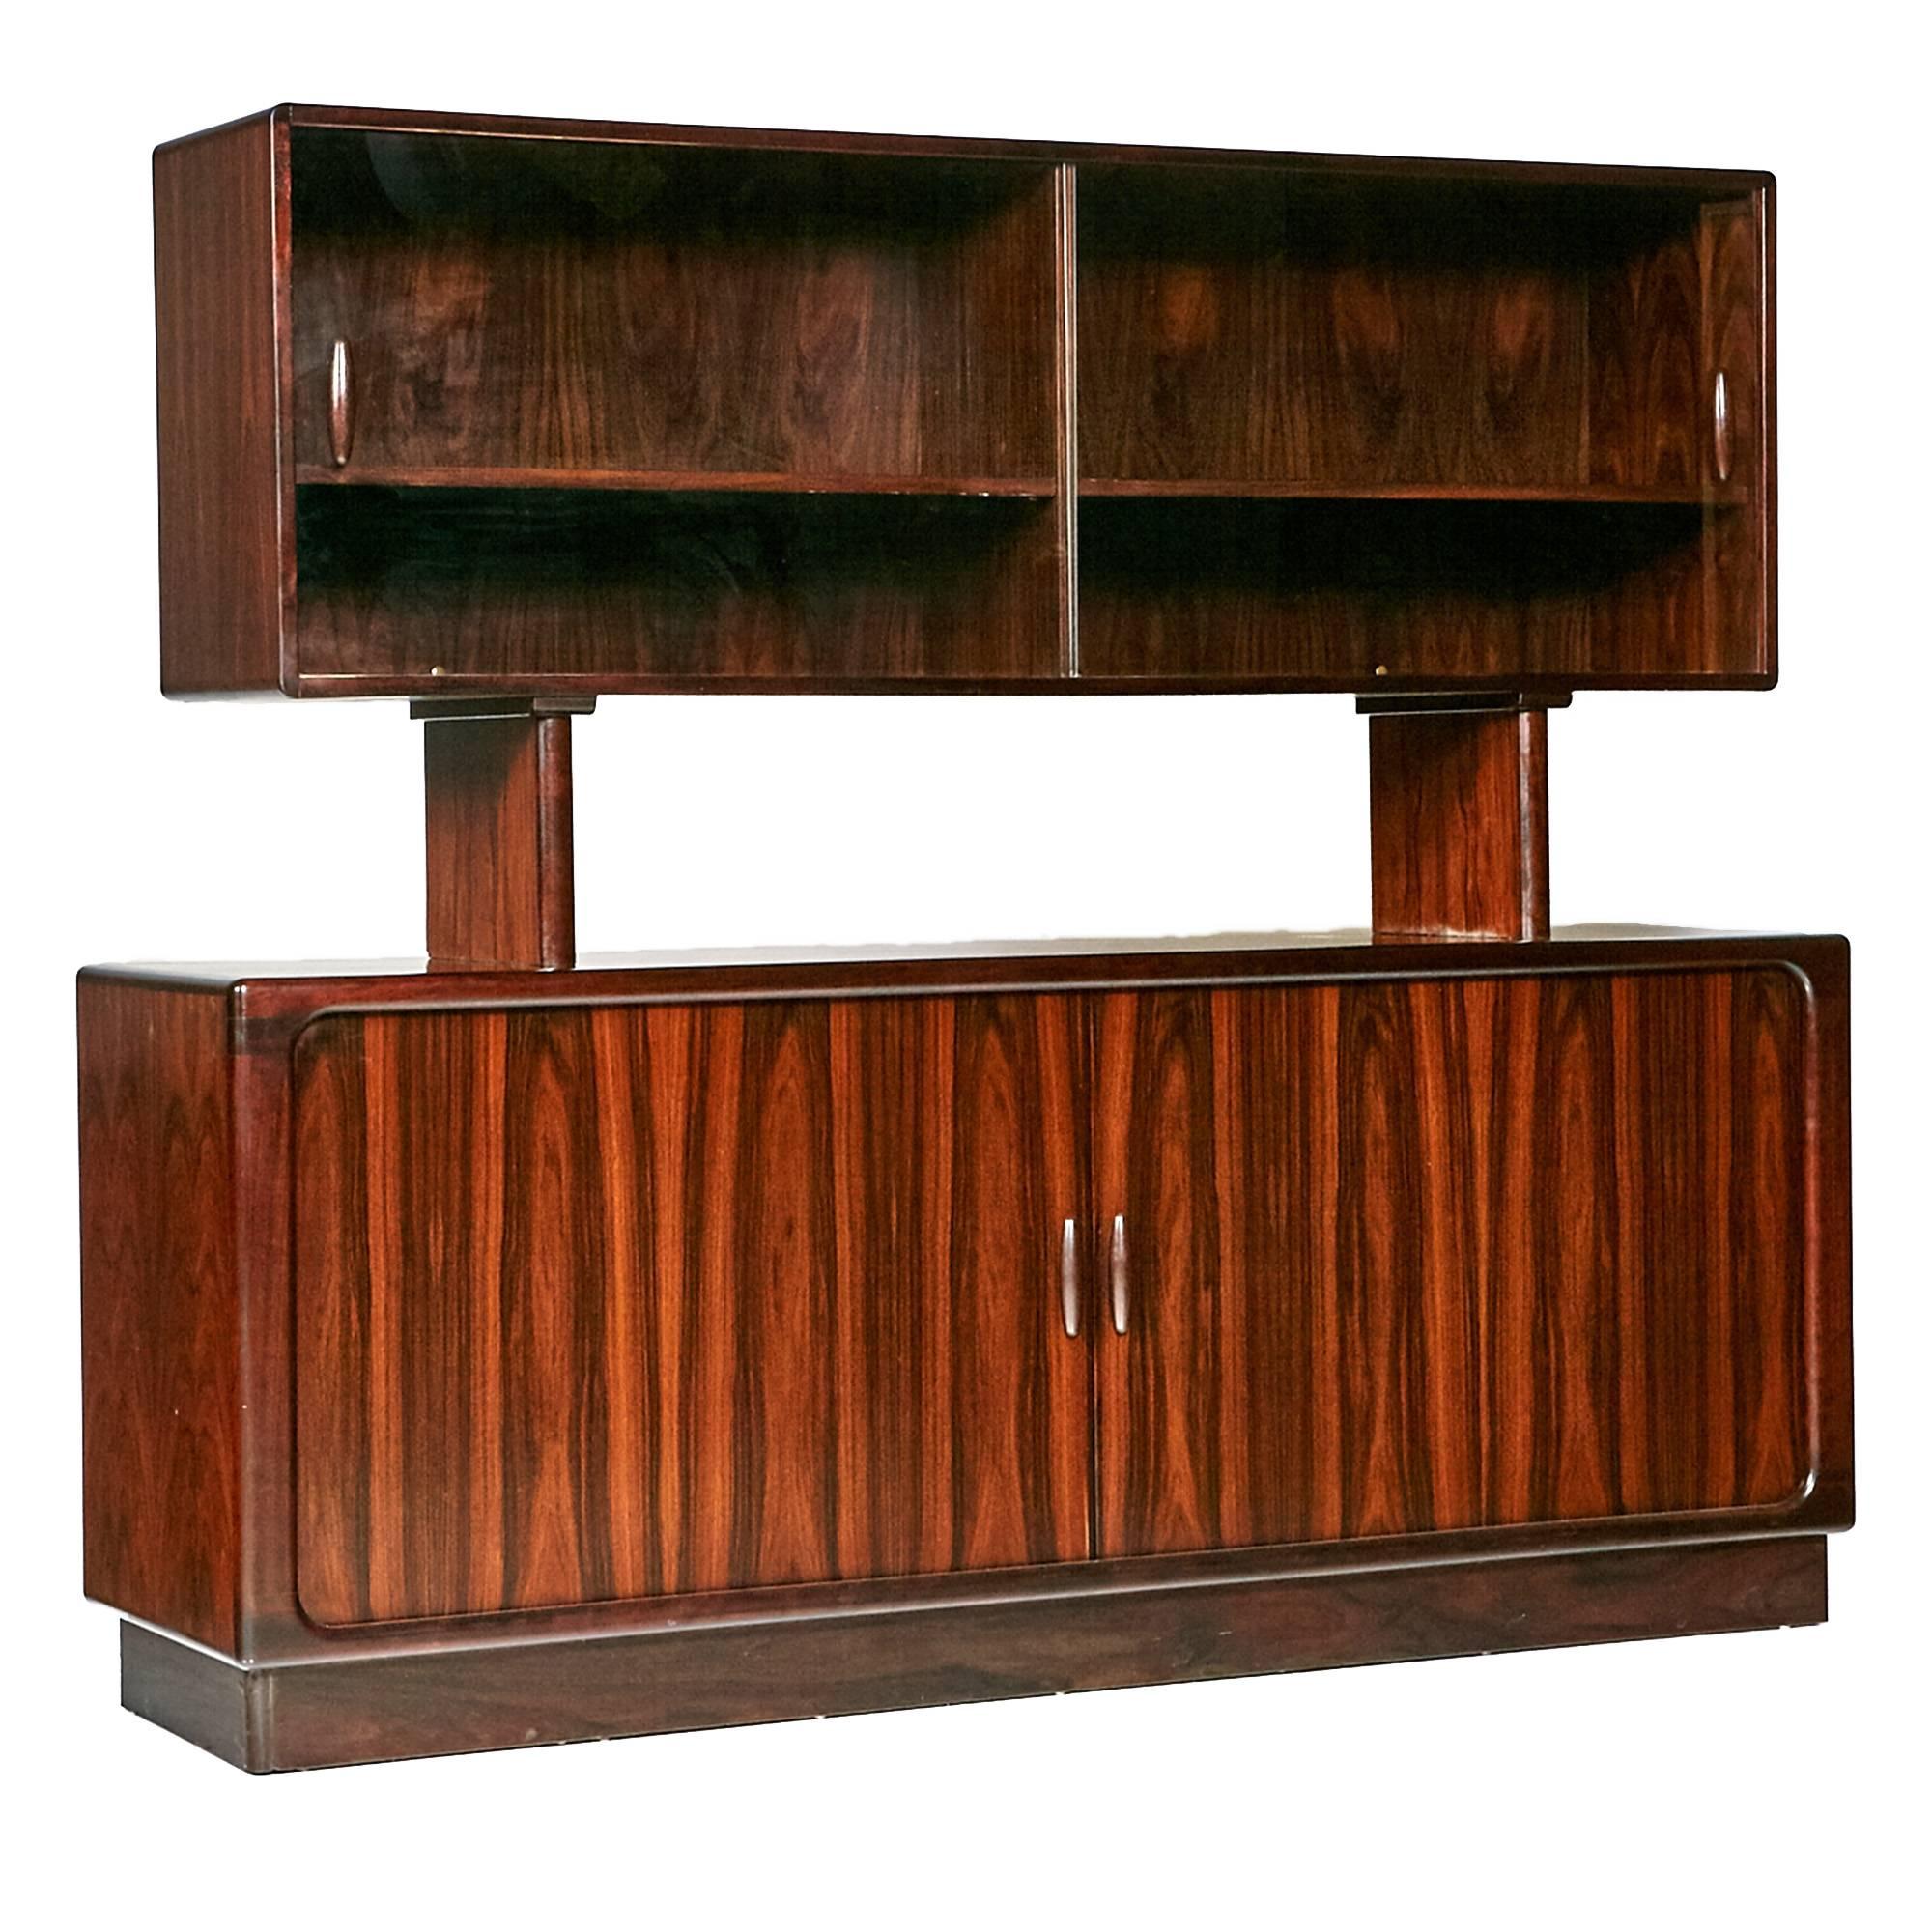 1960s Danish rosewood two-piece credenza with tambour doors with sliding glass doors on top. The base has five drawers for storage and the handles are sculpted rosewood. The top and bottom are not attached. Marked: Dyrlund.